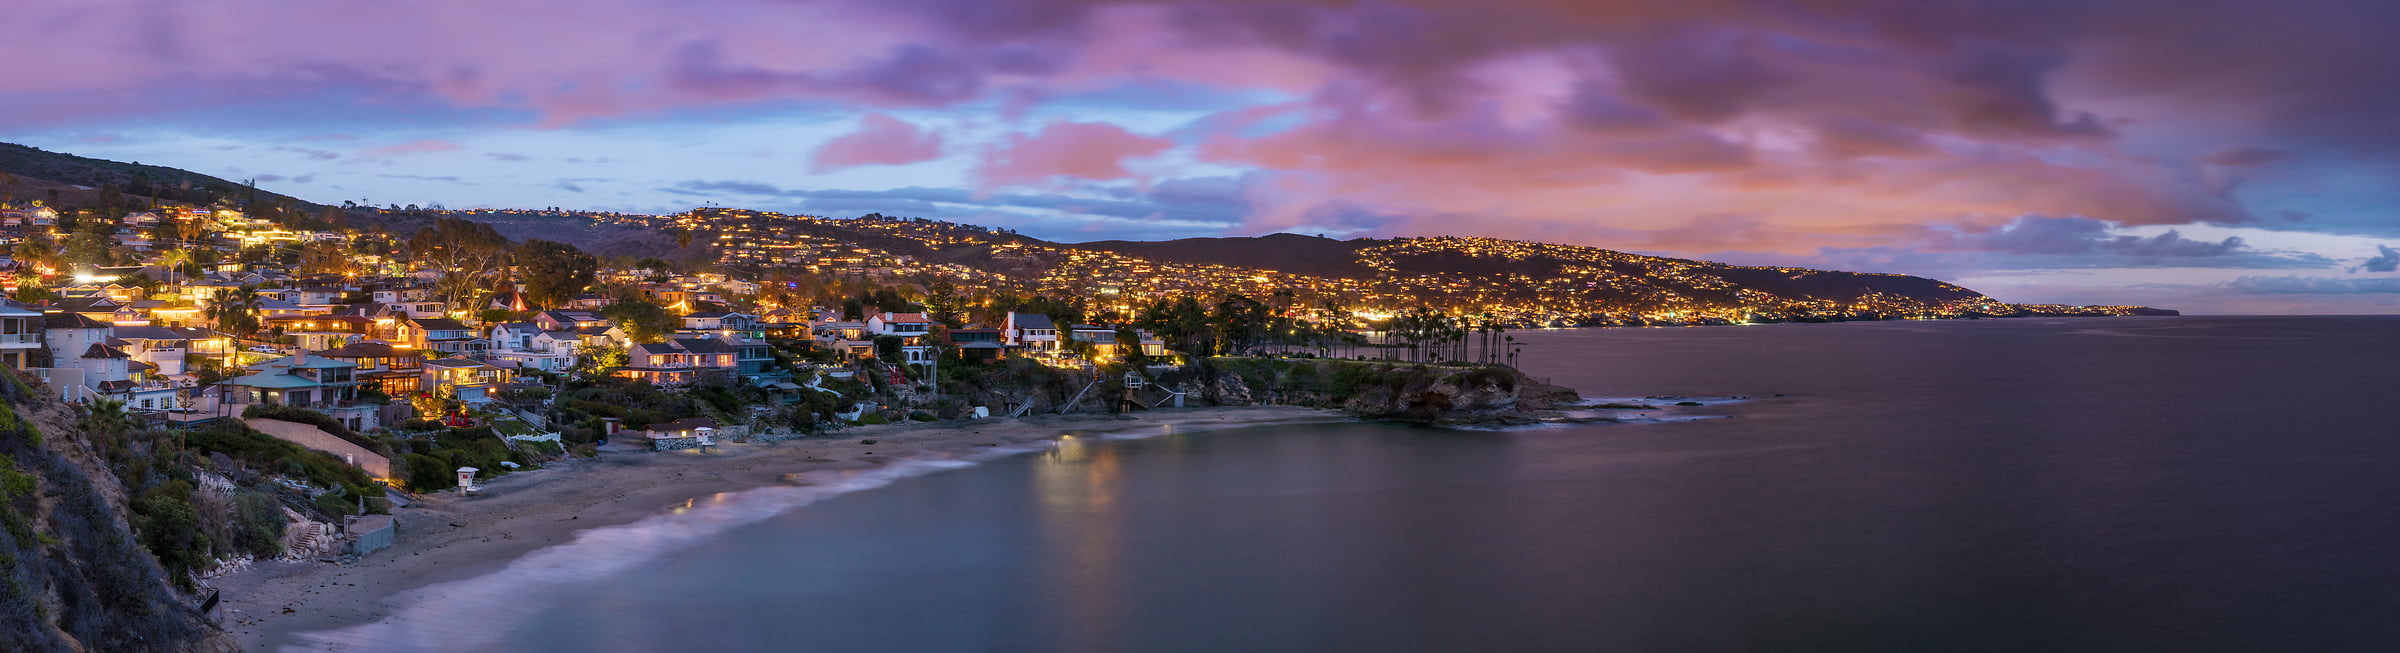 193 megapixels! A very high resolution, large-format VAST photo of a beach town at dusk with a sunset; panorama photograph created by Jim Tarpo in Laguna Beach, California.